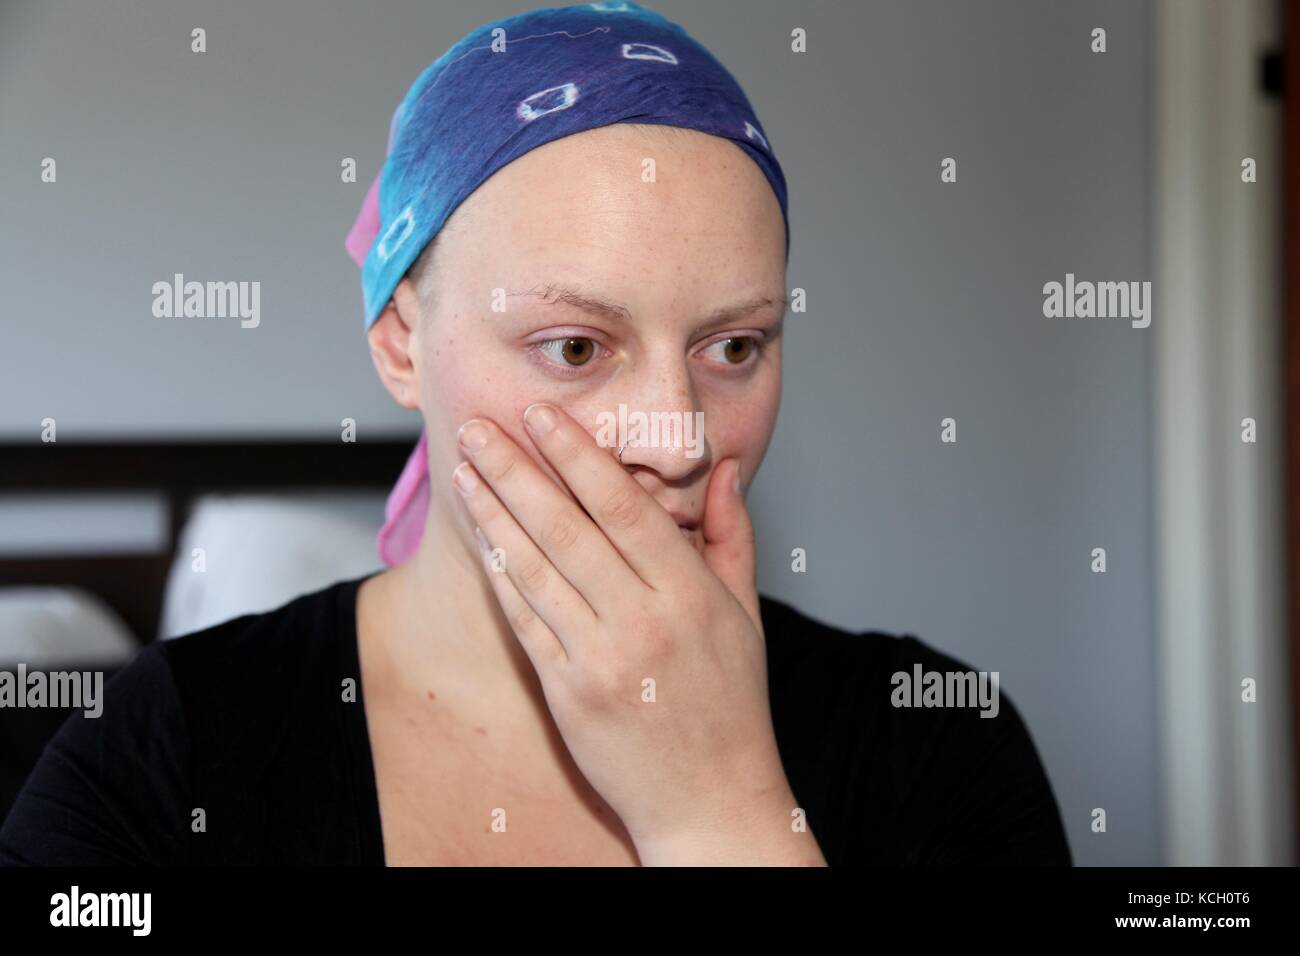 Young cancer patient in a headscarf holds head in hands with stress Stock Photo